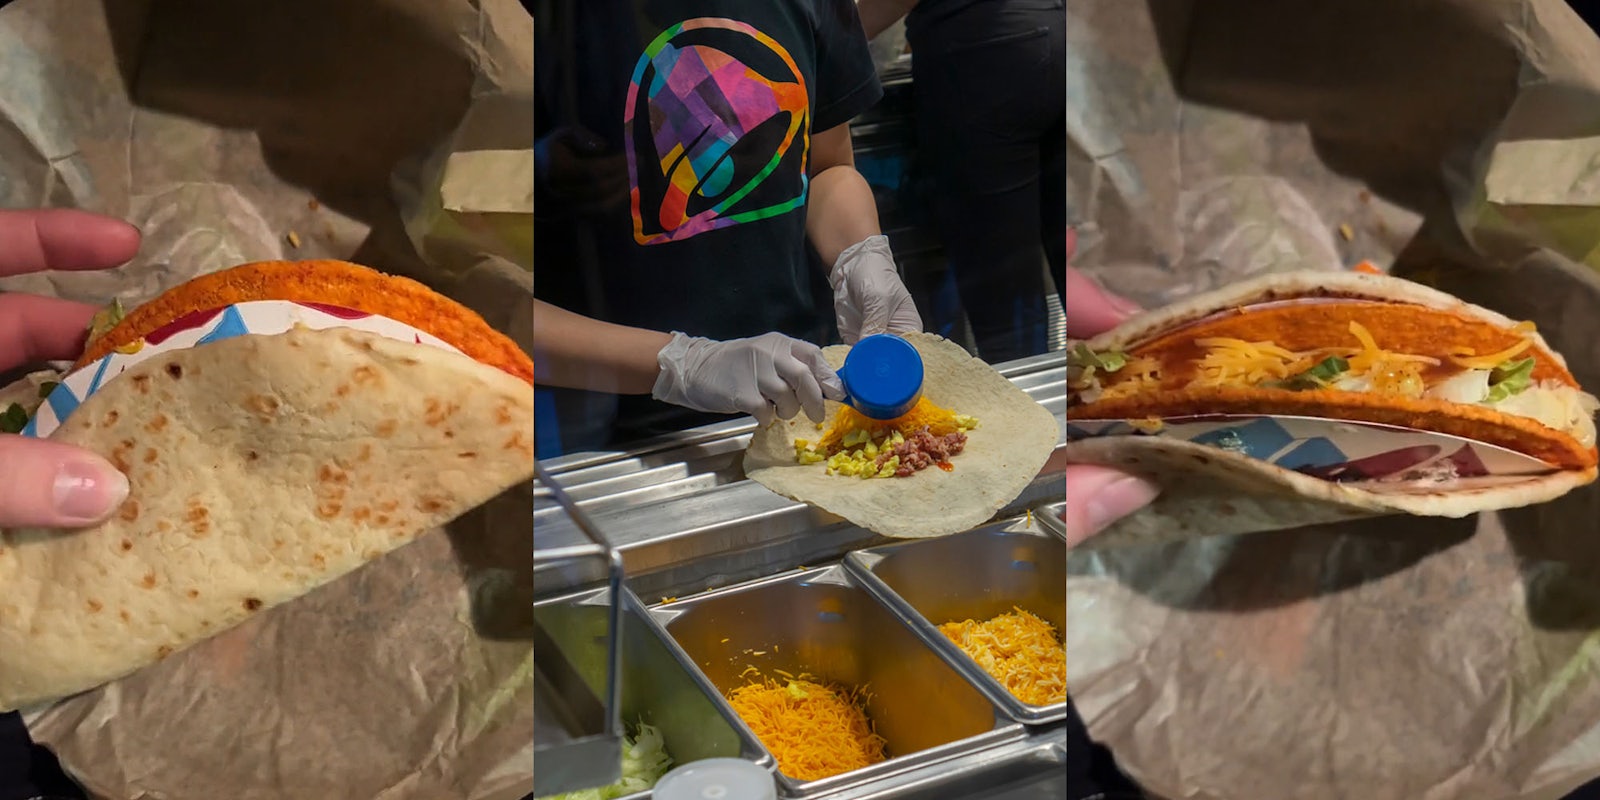 Taco Bell Cheesy Gordita Crunch in hand with cardboard between tortilla and taco shell (l) Taco Bell employee putting cheese on tortilla (c) Taco Bell Cheesy Gordita Crunch in hand with cardboard between tortilla and taco shell (r)